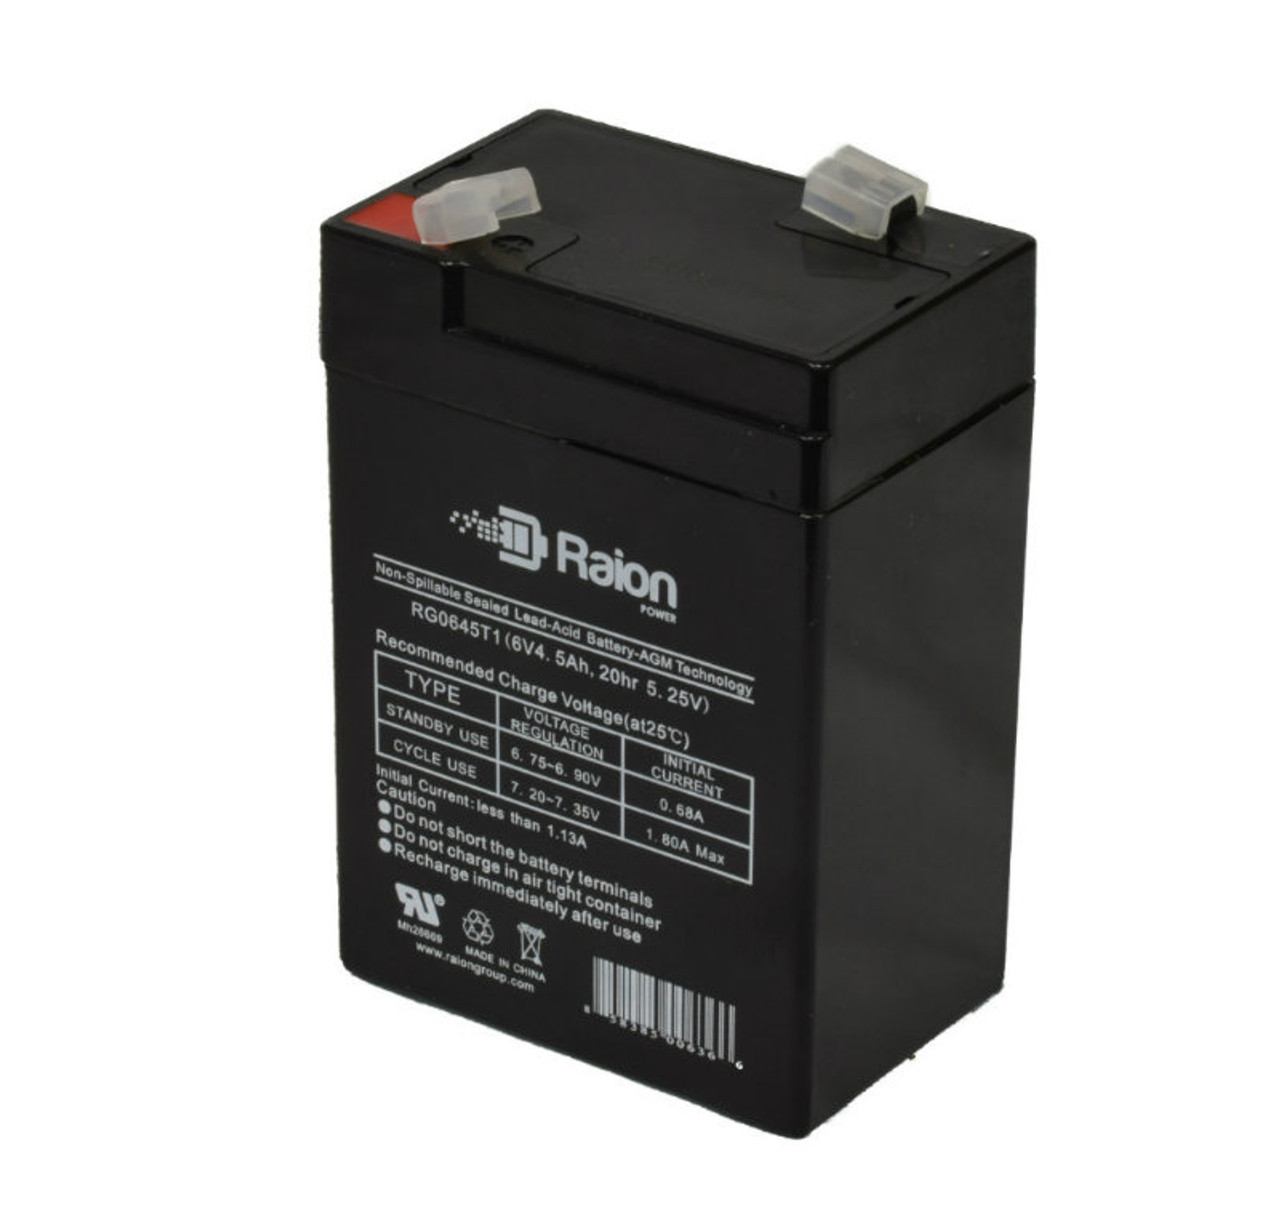 Raion Power RG0645T1 6V 4.5Ah Replacement Battery Cartridge for Delta DTM 6045